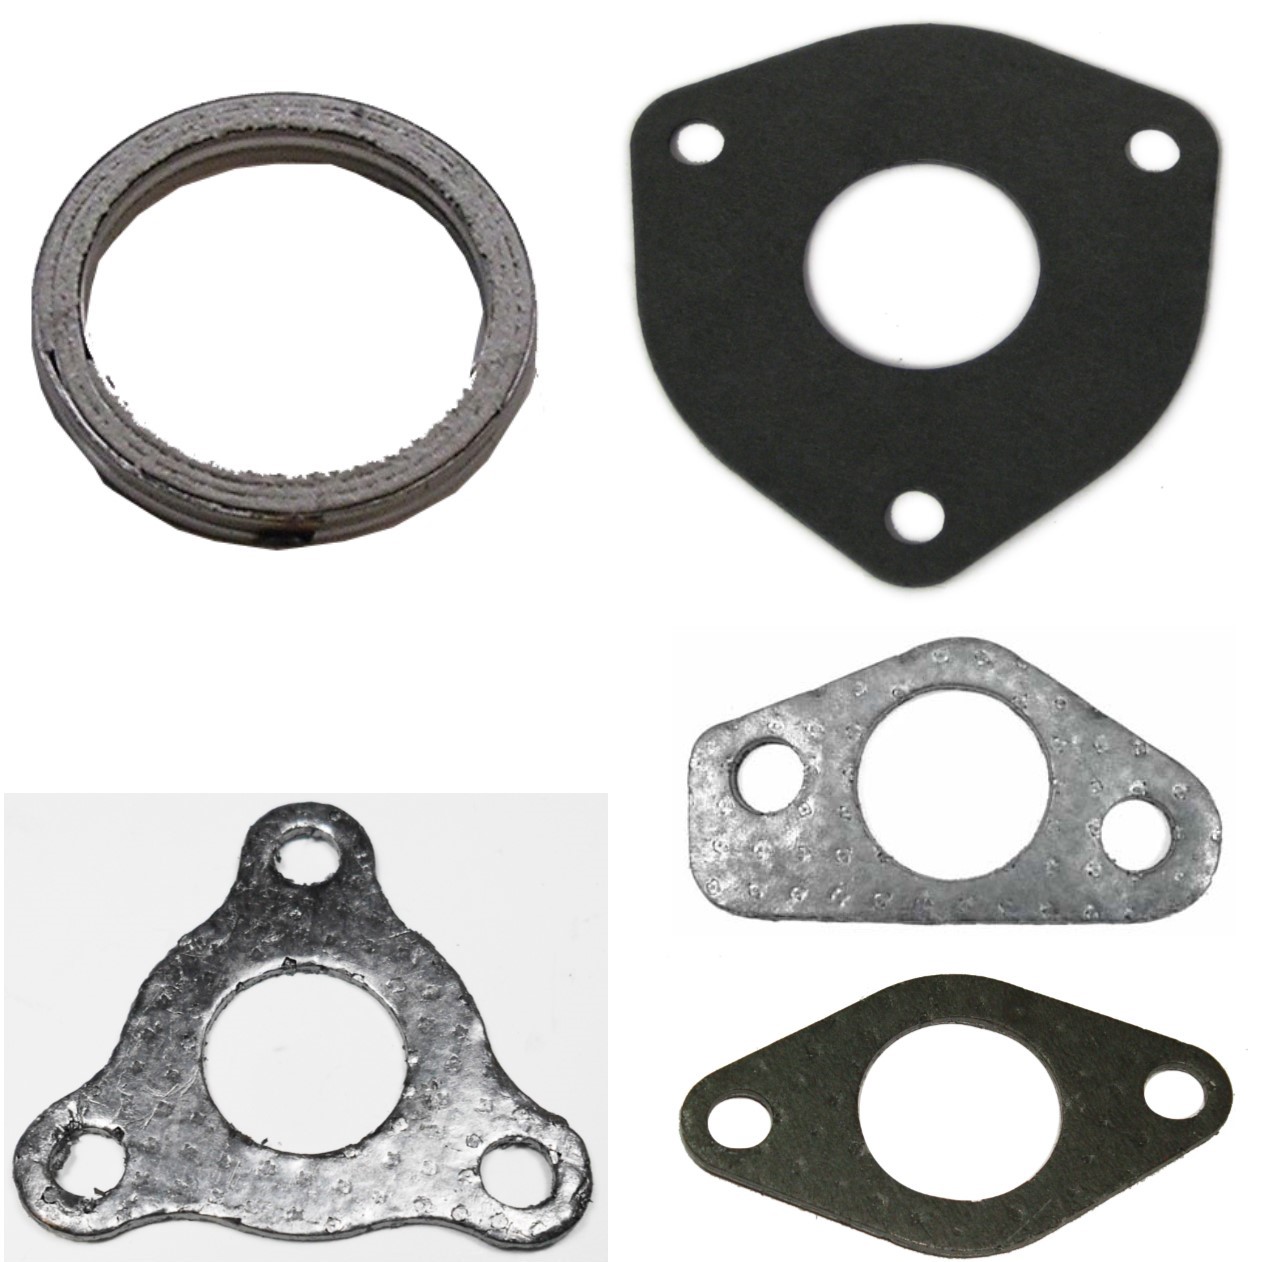 Exhaust Gaskets For Most Popular Engines